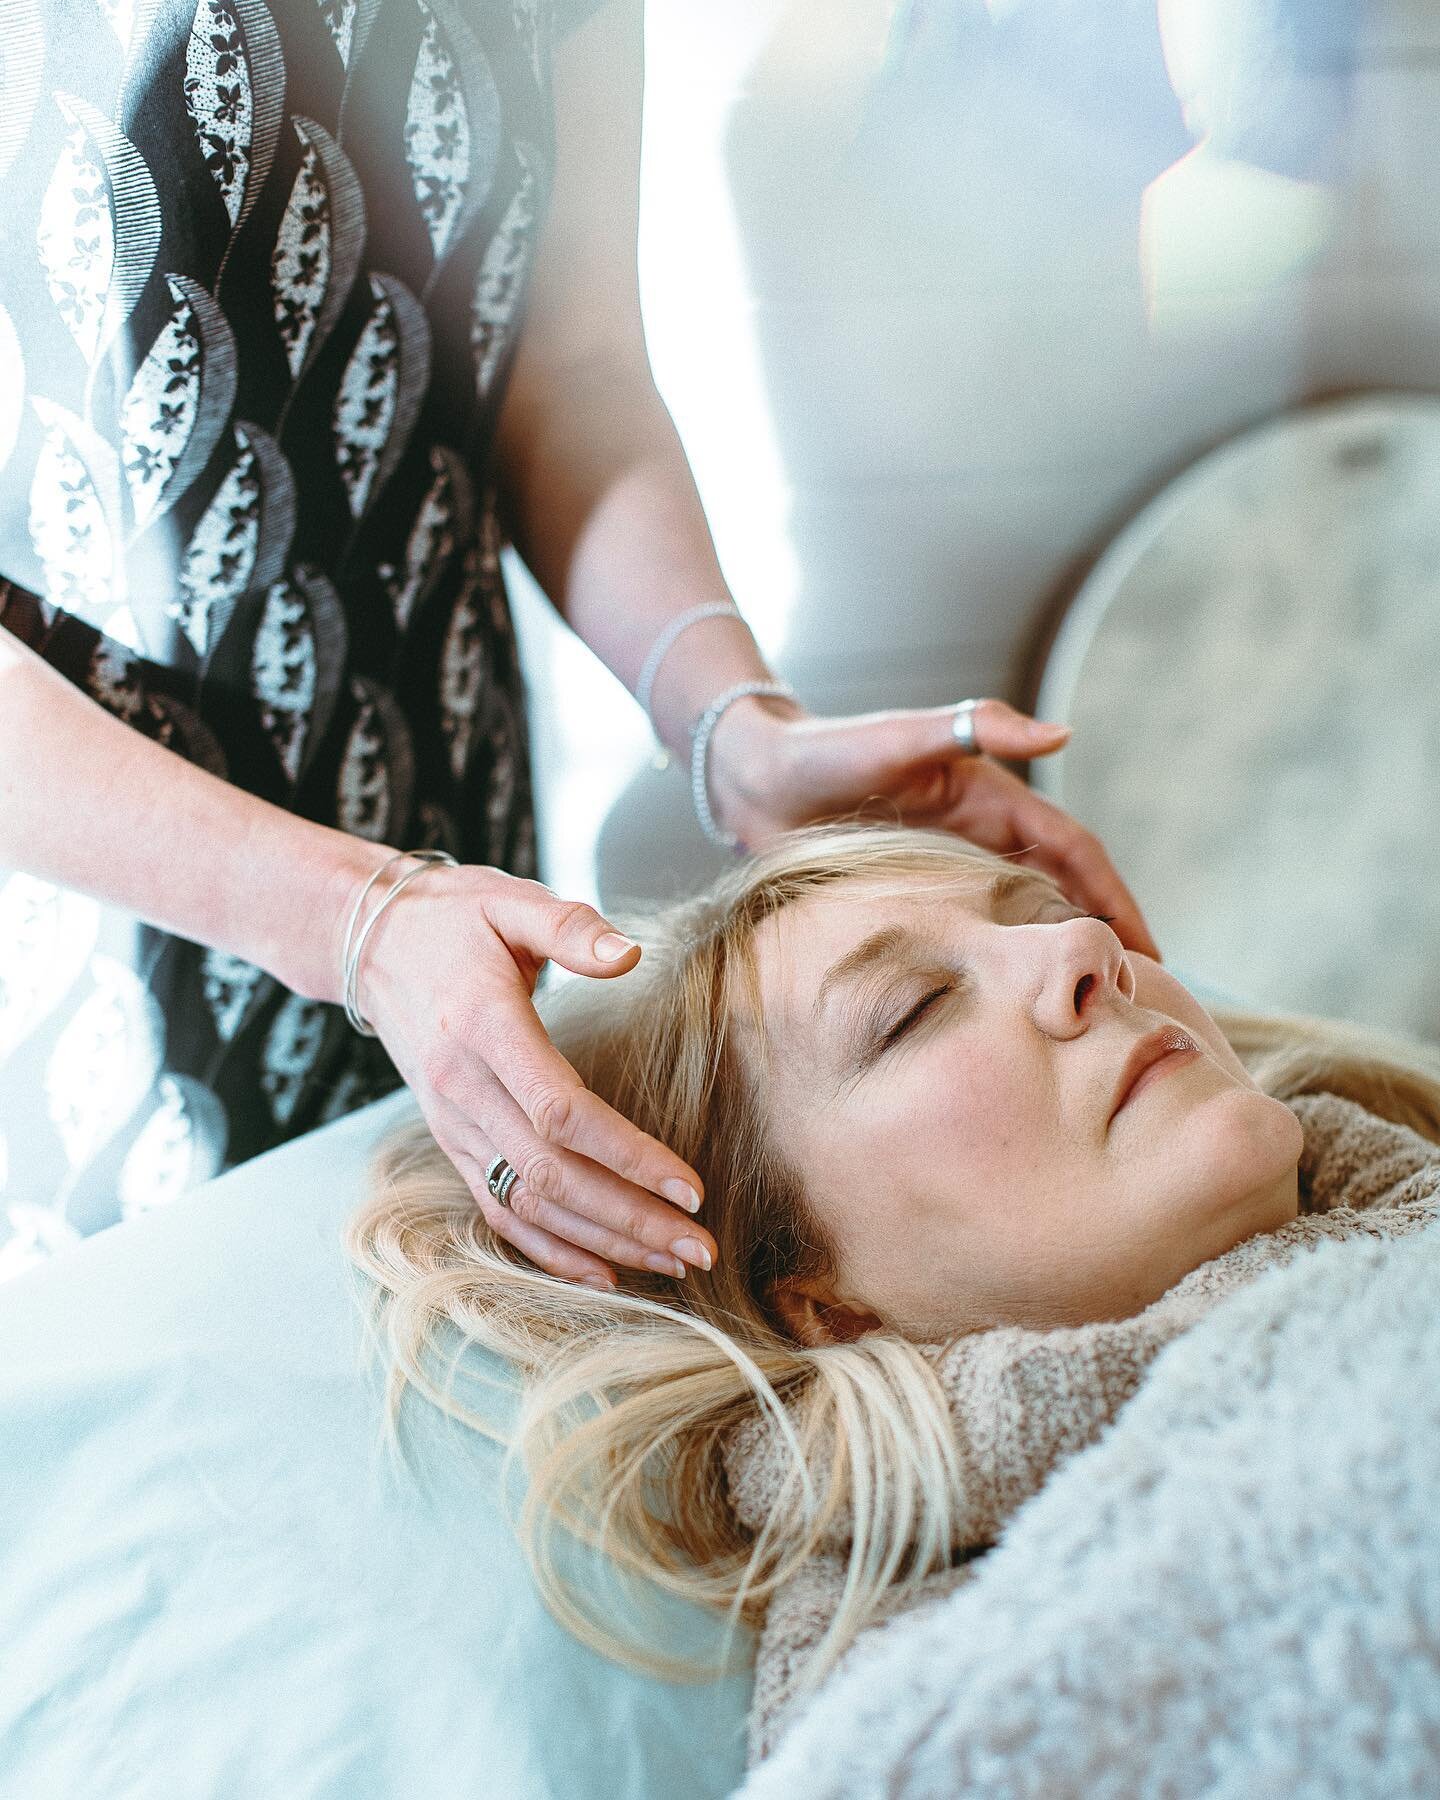 I had the most beautiful personal brand shoot this morning with an incredibly talented Reiki, Crystal and Reflexologist therapist in rural Cheshire!  Everything about this creative experience was positive and magical; just how I like it!  And for the